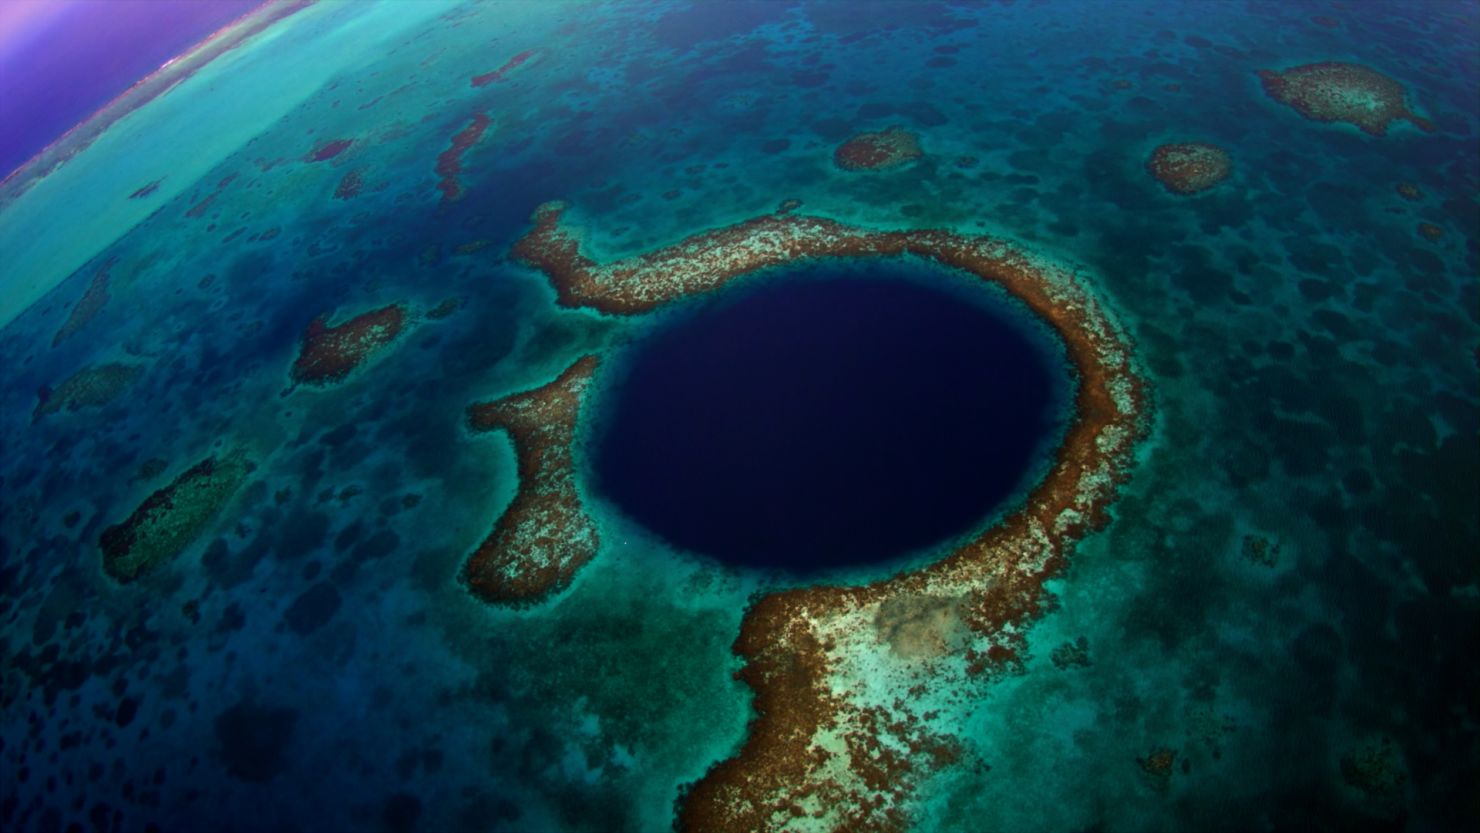 The Great Blue Hole is a massive underwater sinkhole that gives divers an almost perfect circle to dive in.